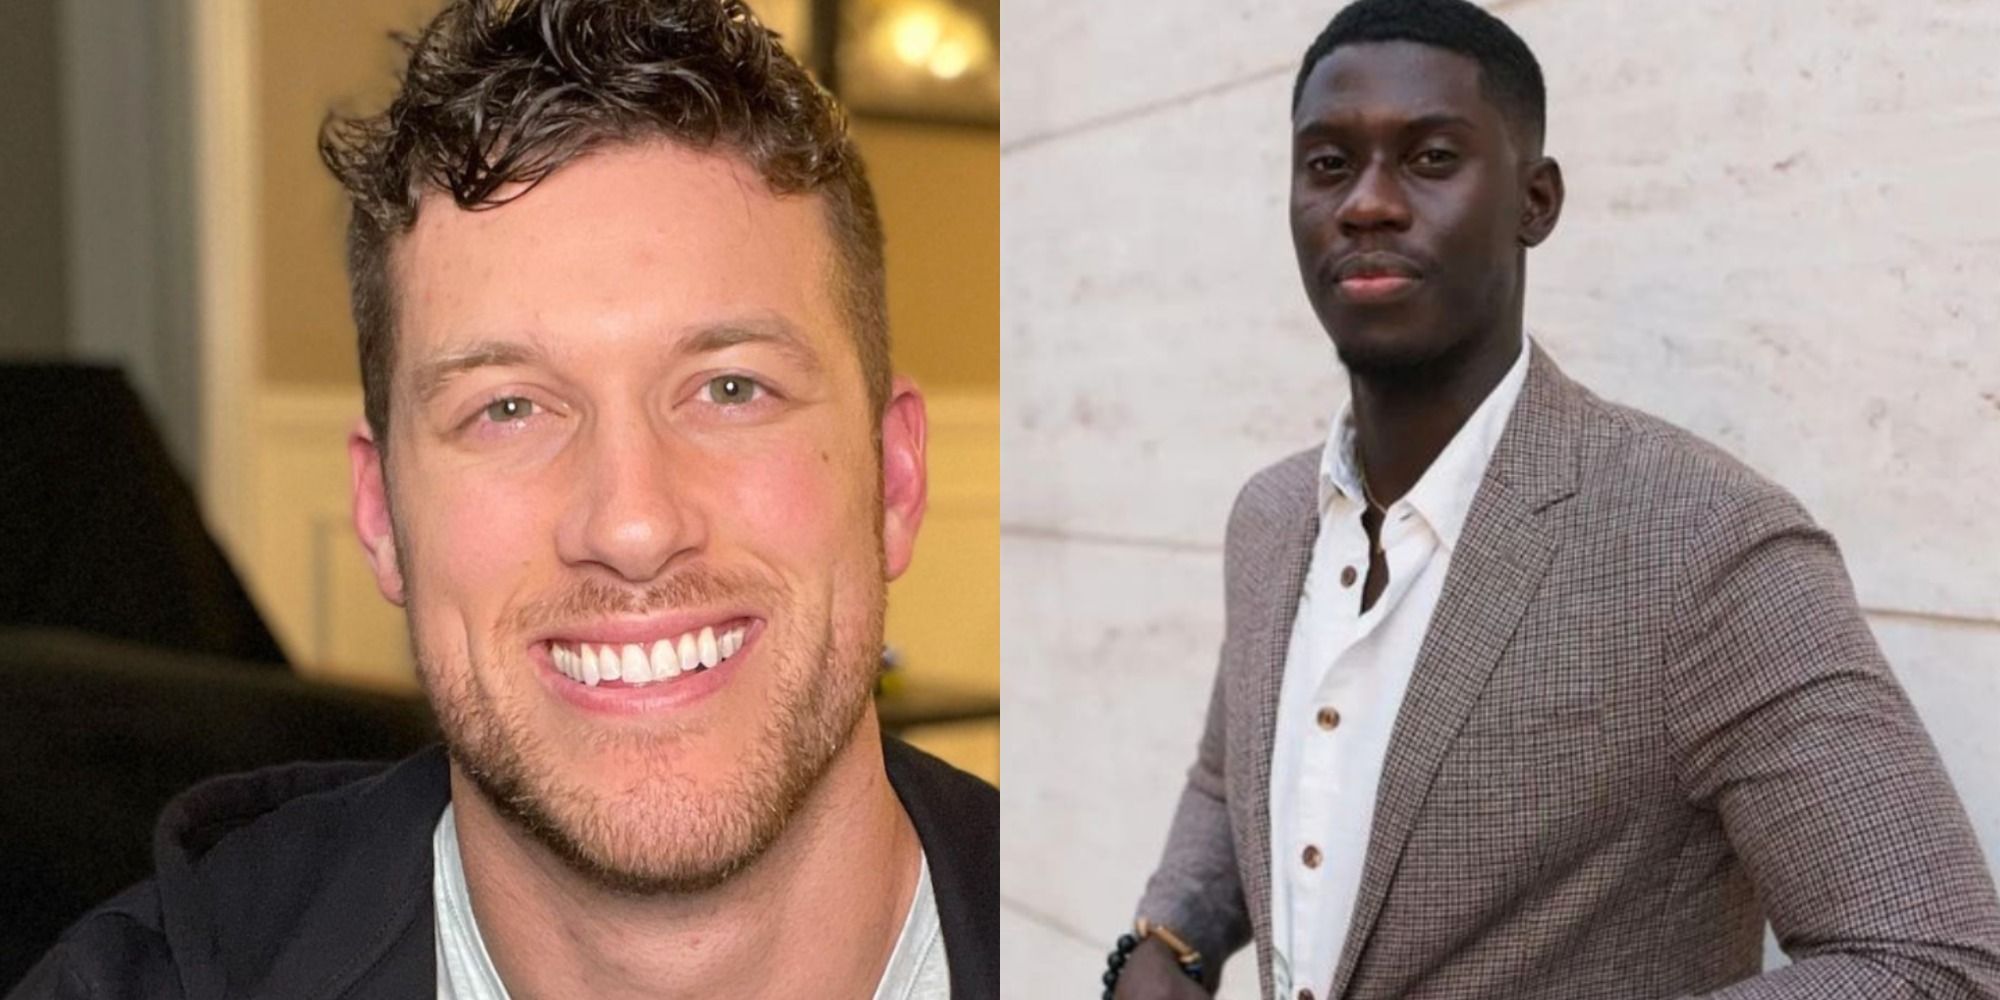 Two side by side images of Bachelors from Season 18 of The Bachelorette